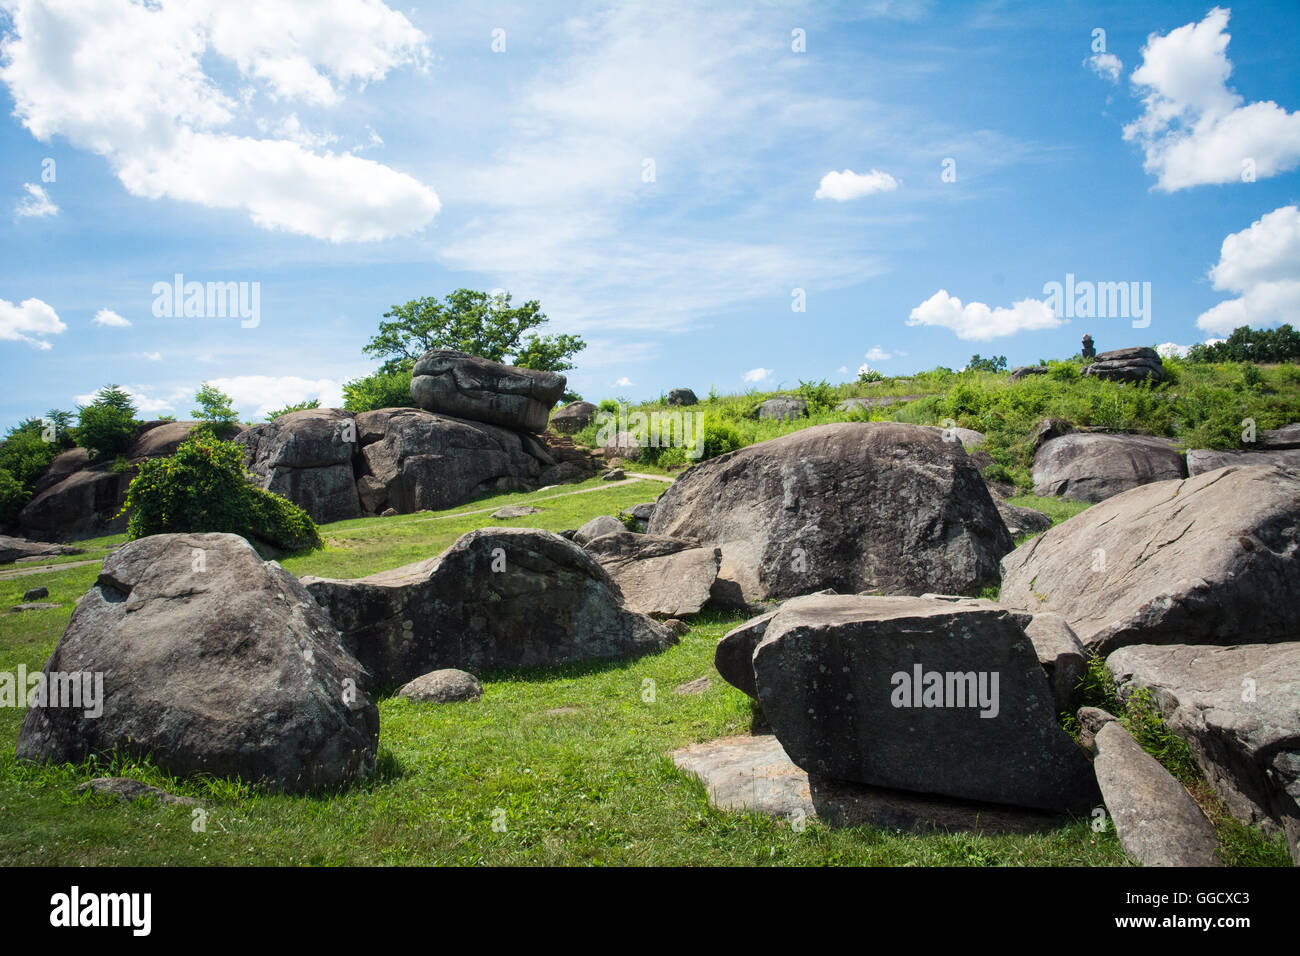 Devil's Den at Gettysburg National Military Park will close for up